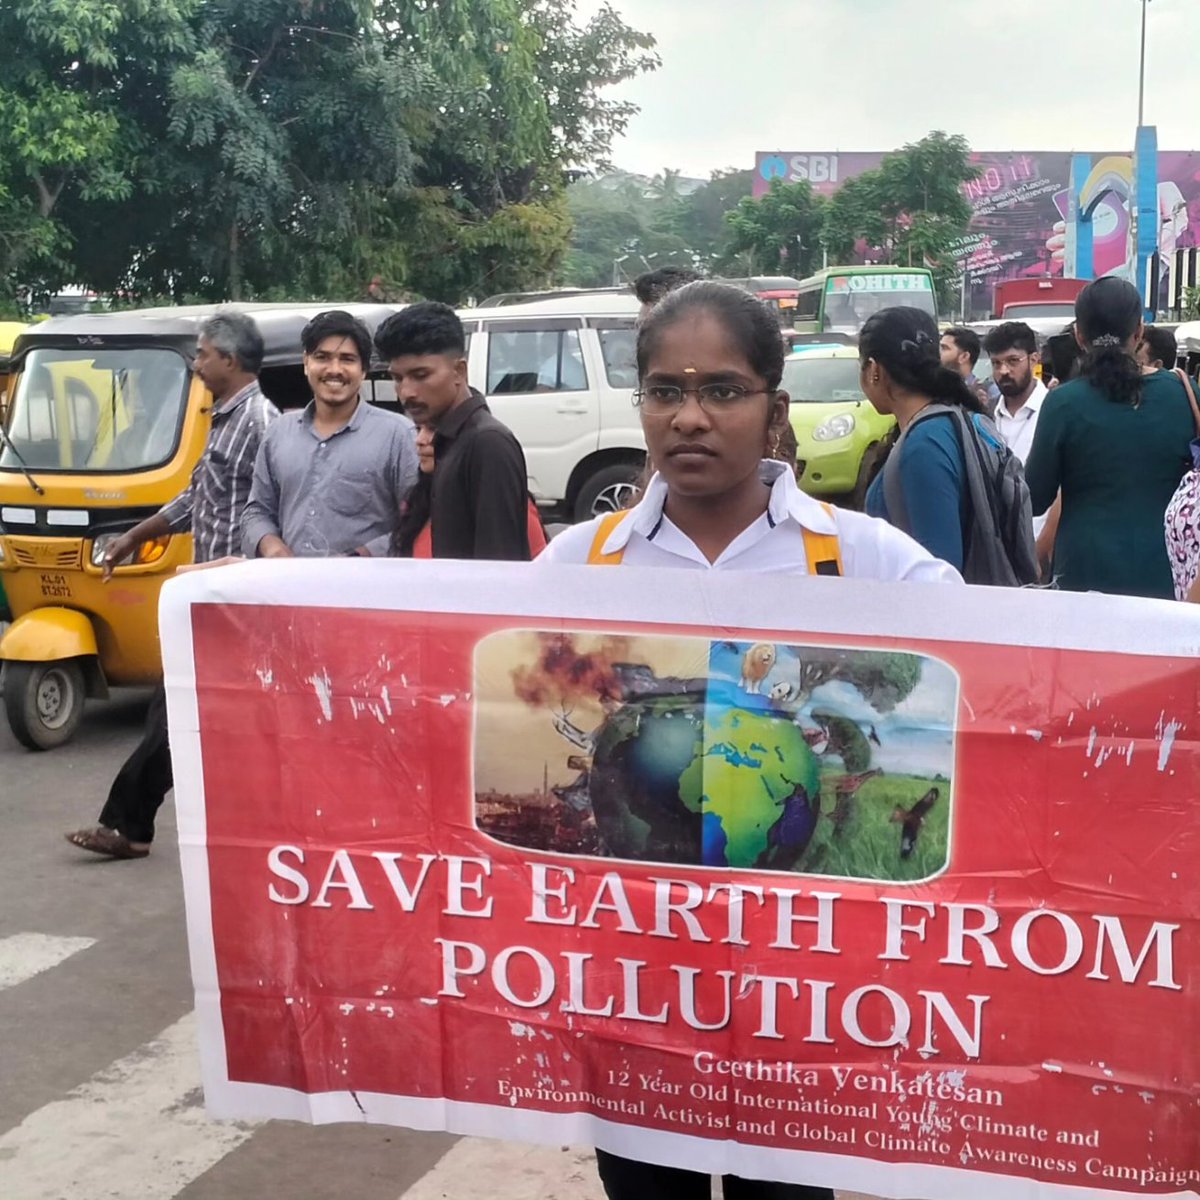 At Trivendrum City, Keralam...I hope this Environmental journey gives me a small satisfaction .
A small awareness Campaign at busiest busstand area of #Trivendrum City .
#SaveEarthFromPollution 
#SaveForestry 
#DontDestroyForestry #MinimizeUrbanDream #SaveEarth @GretaThunberg